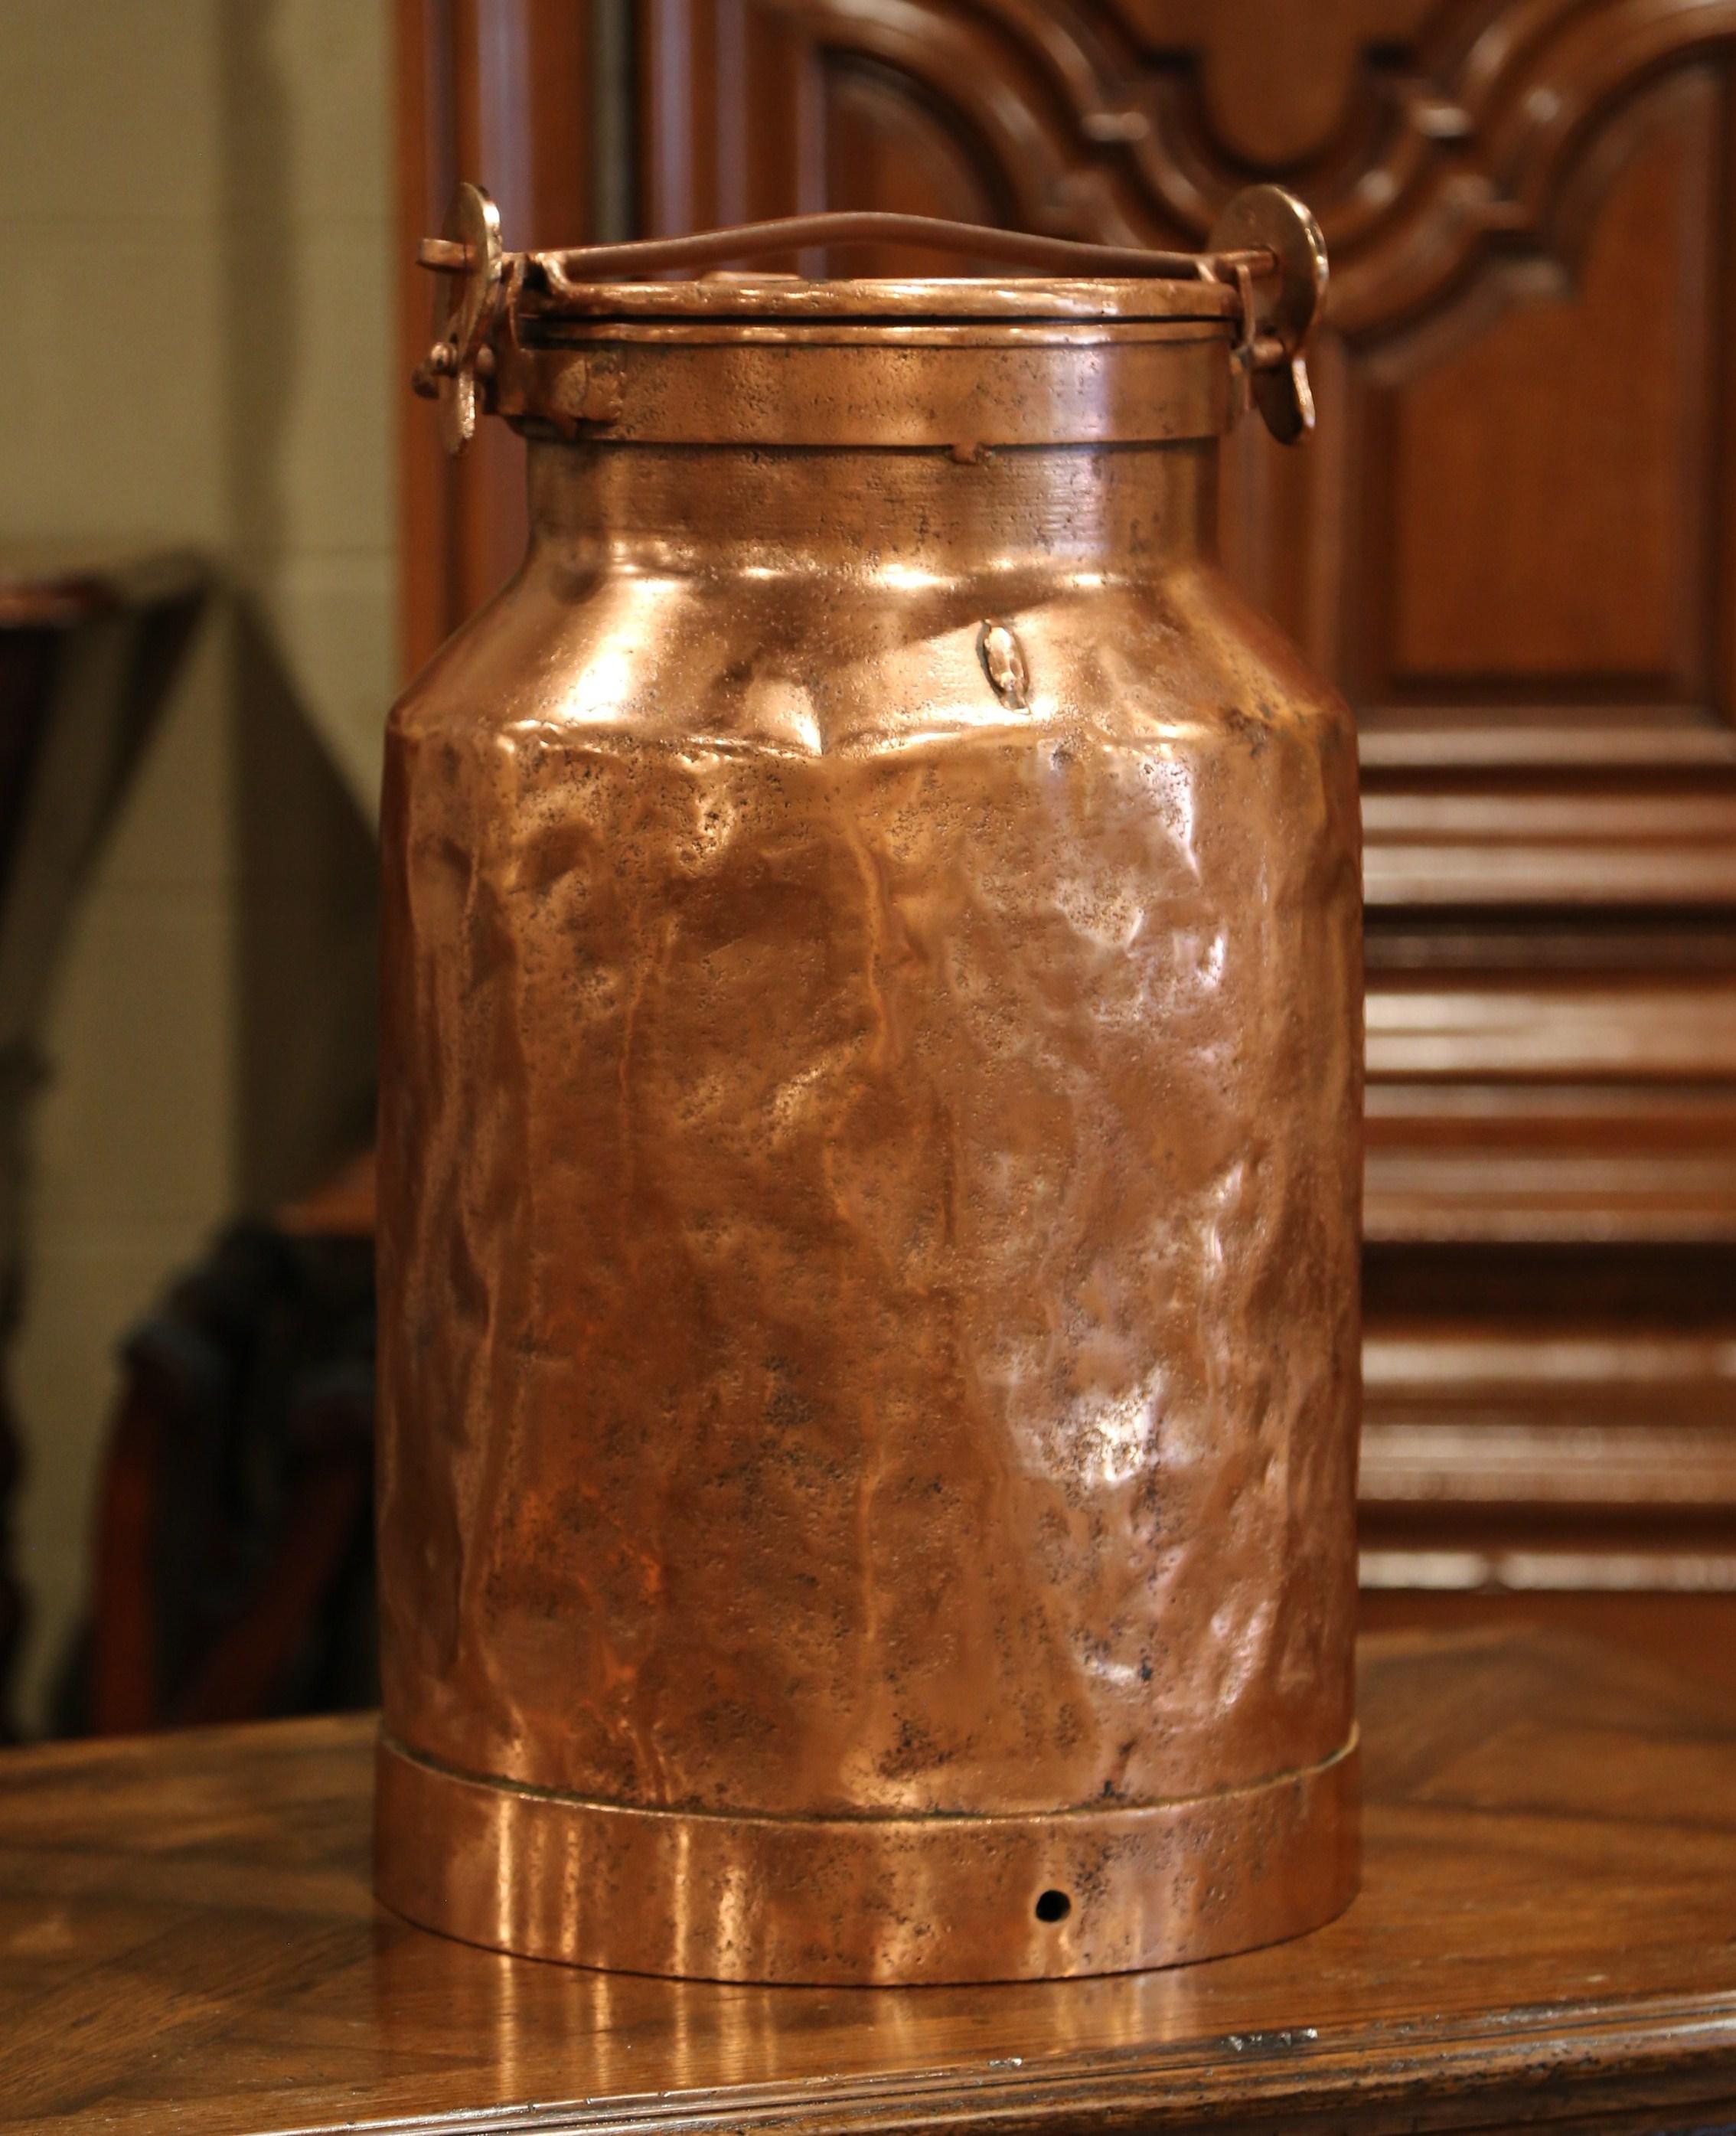 Keep your house organized by placing this beautiful, antique milk can as an umbrella stand by your front or back door. Crafted in France circa 1880, the tall copper container has a moveable, arched top handle and its original removable lid. The